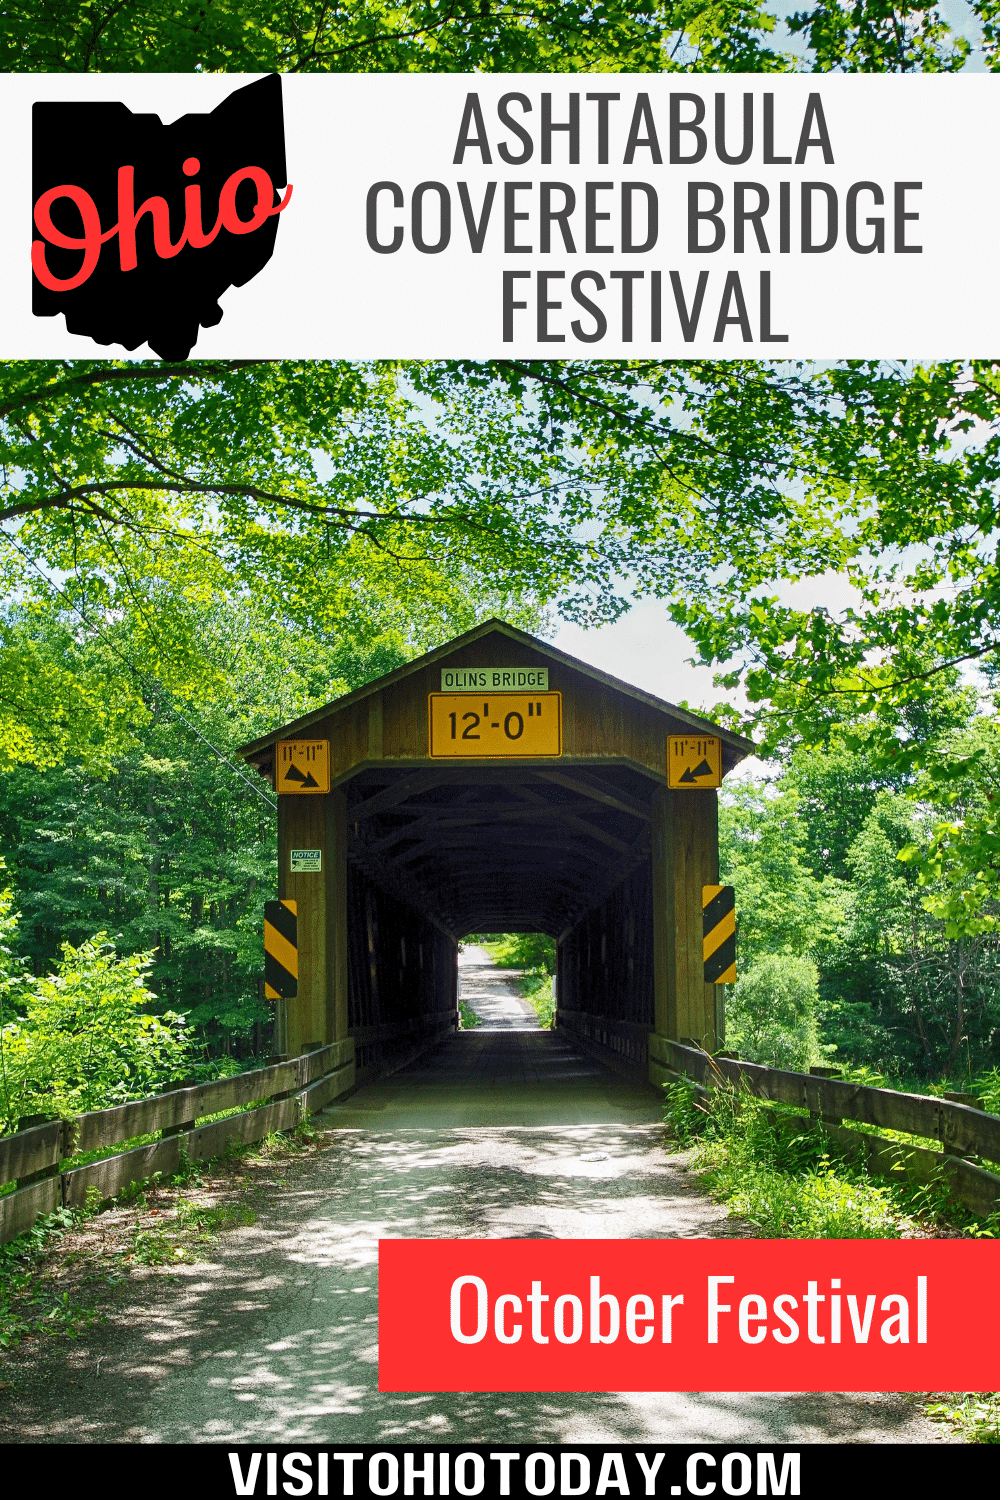 The central part of the Ashtabula Covered Bridge Festival is held in Jefferson, but the big event here is a self-guided driving tour of Ashtabula’s covered bridges. This festival takes place on 14th and 15th October 2023.